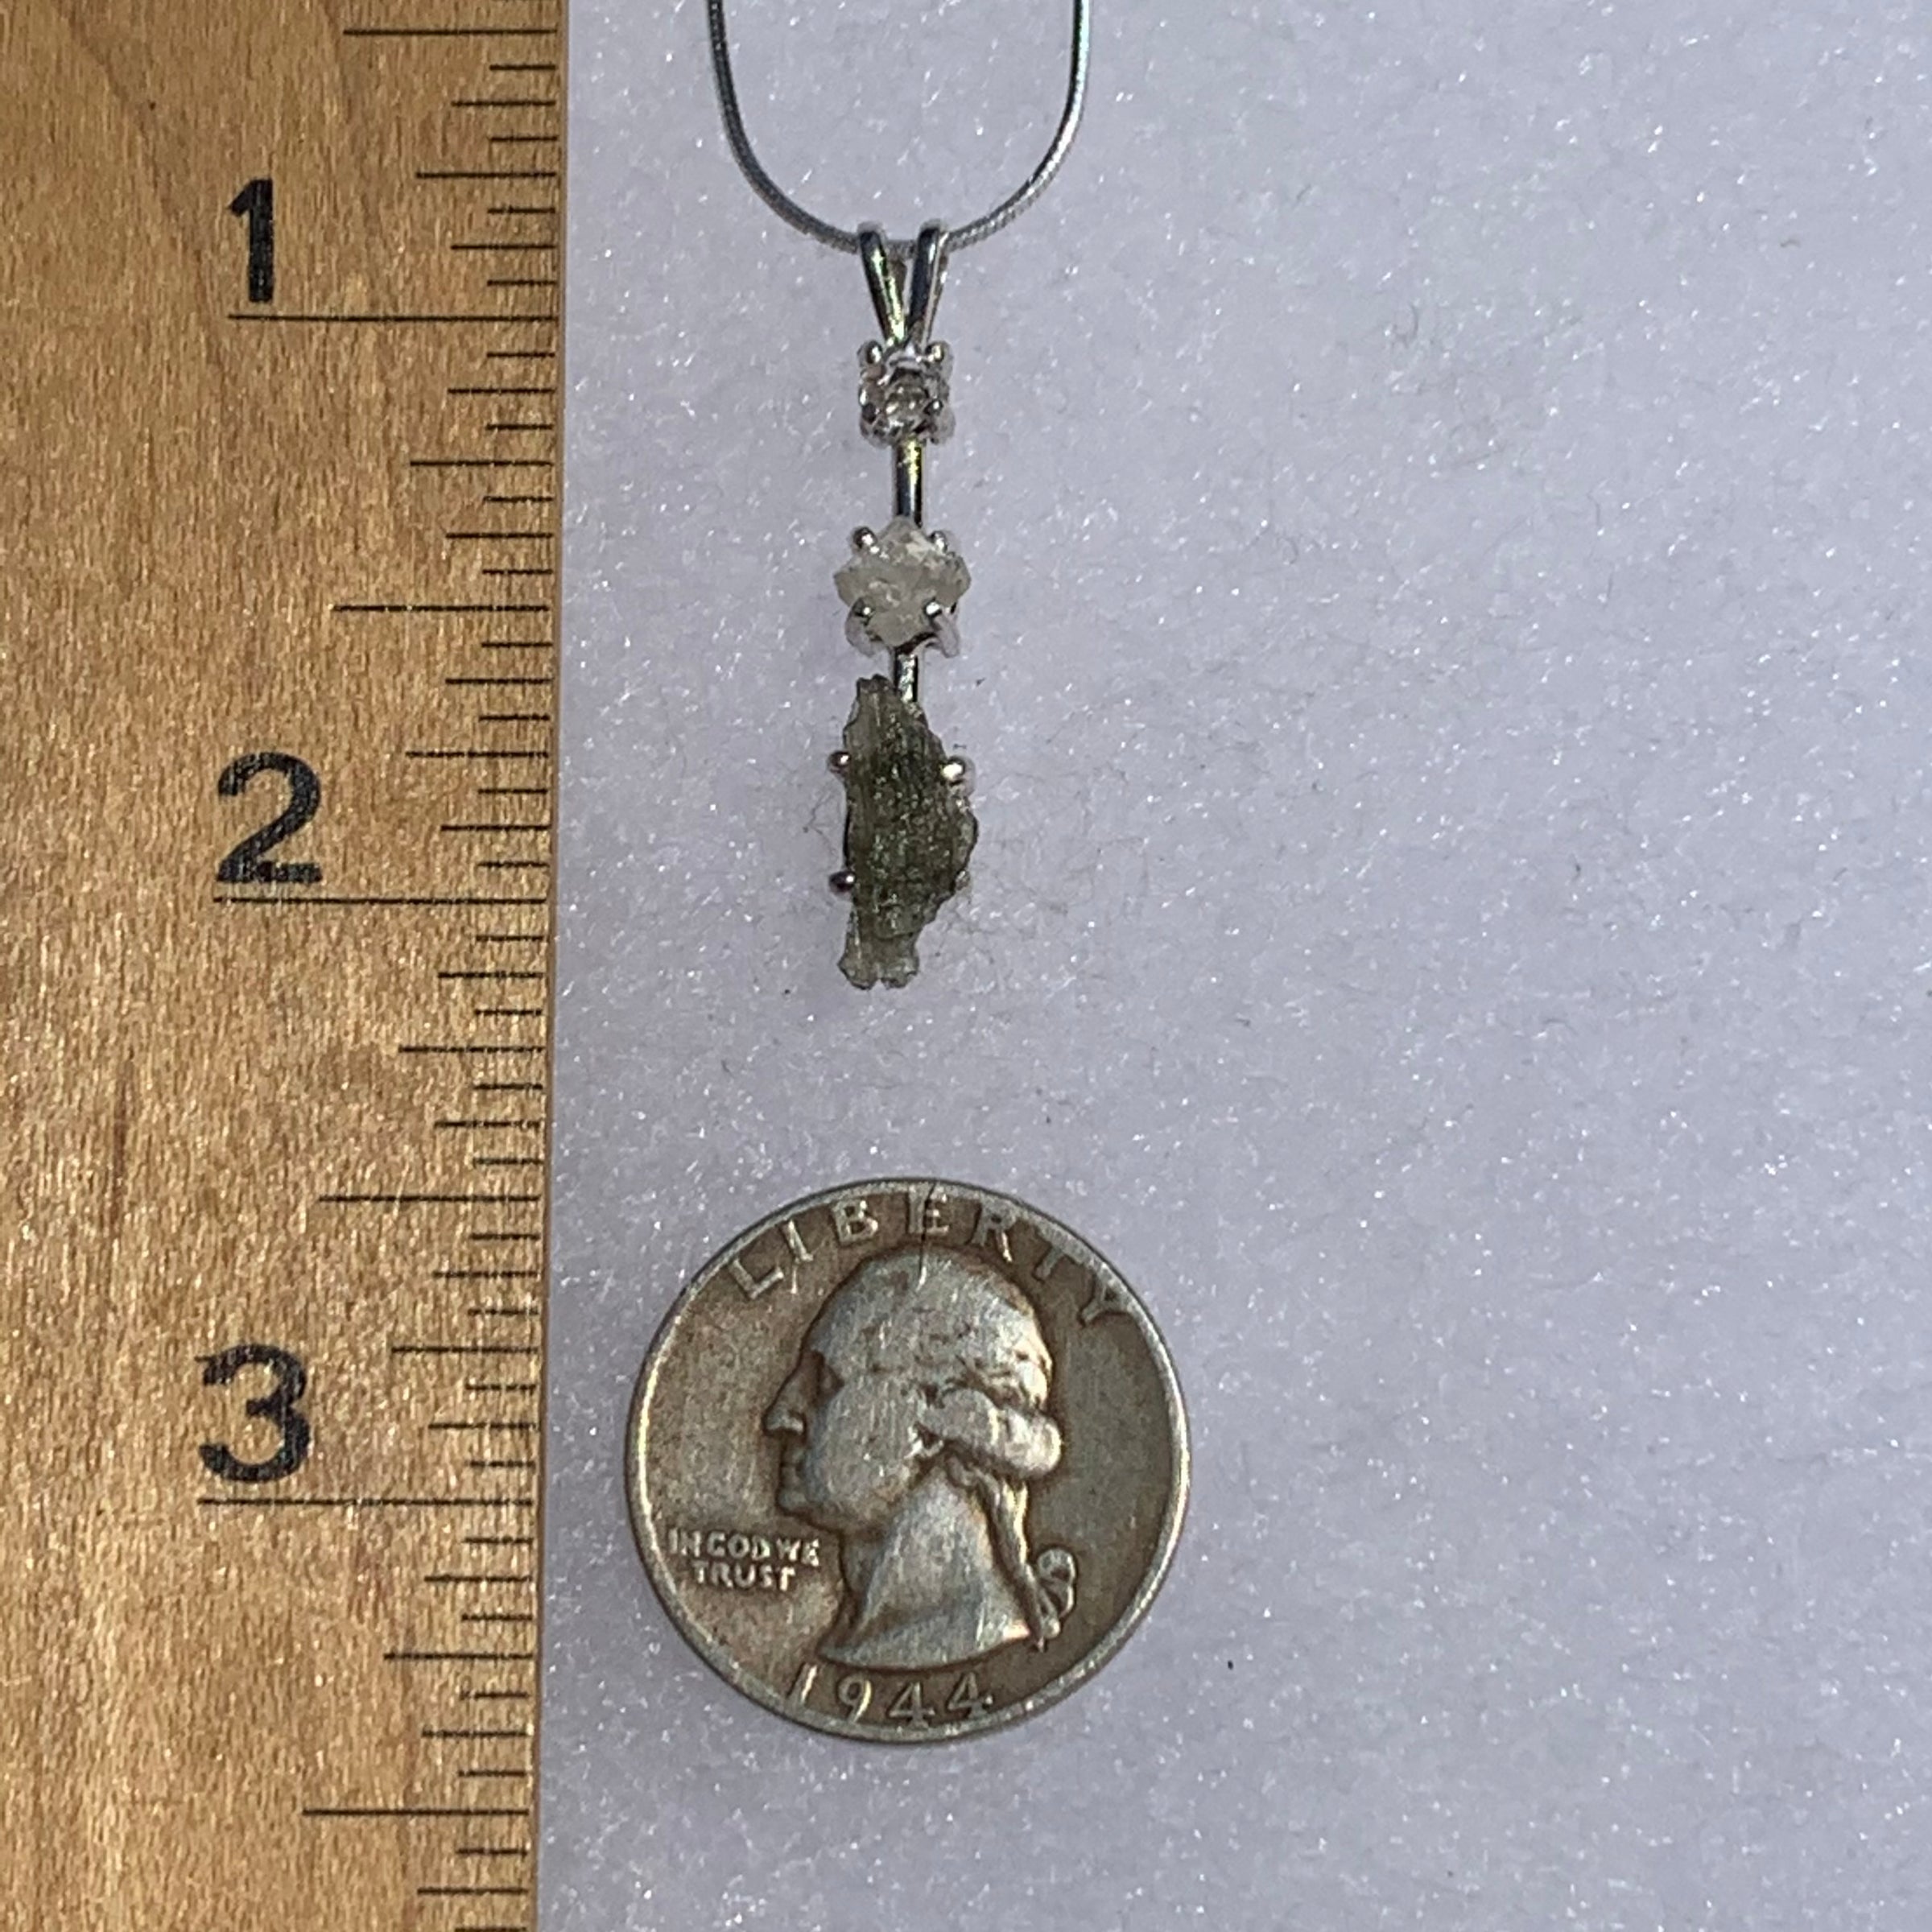 sterling silver pendant necklace with Herkimer diamond, moldavite, and phenacite next to a ruler and a US quarter for scale